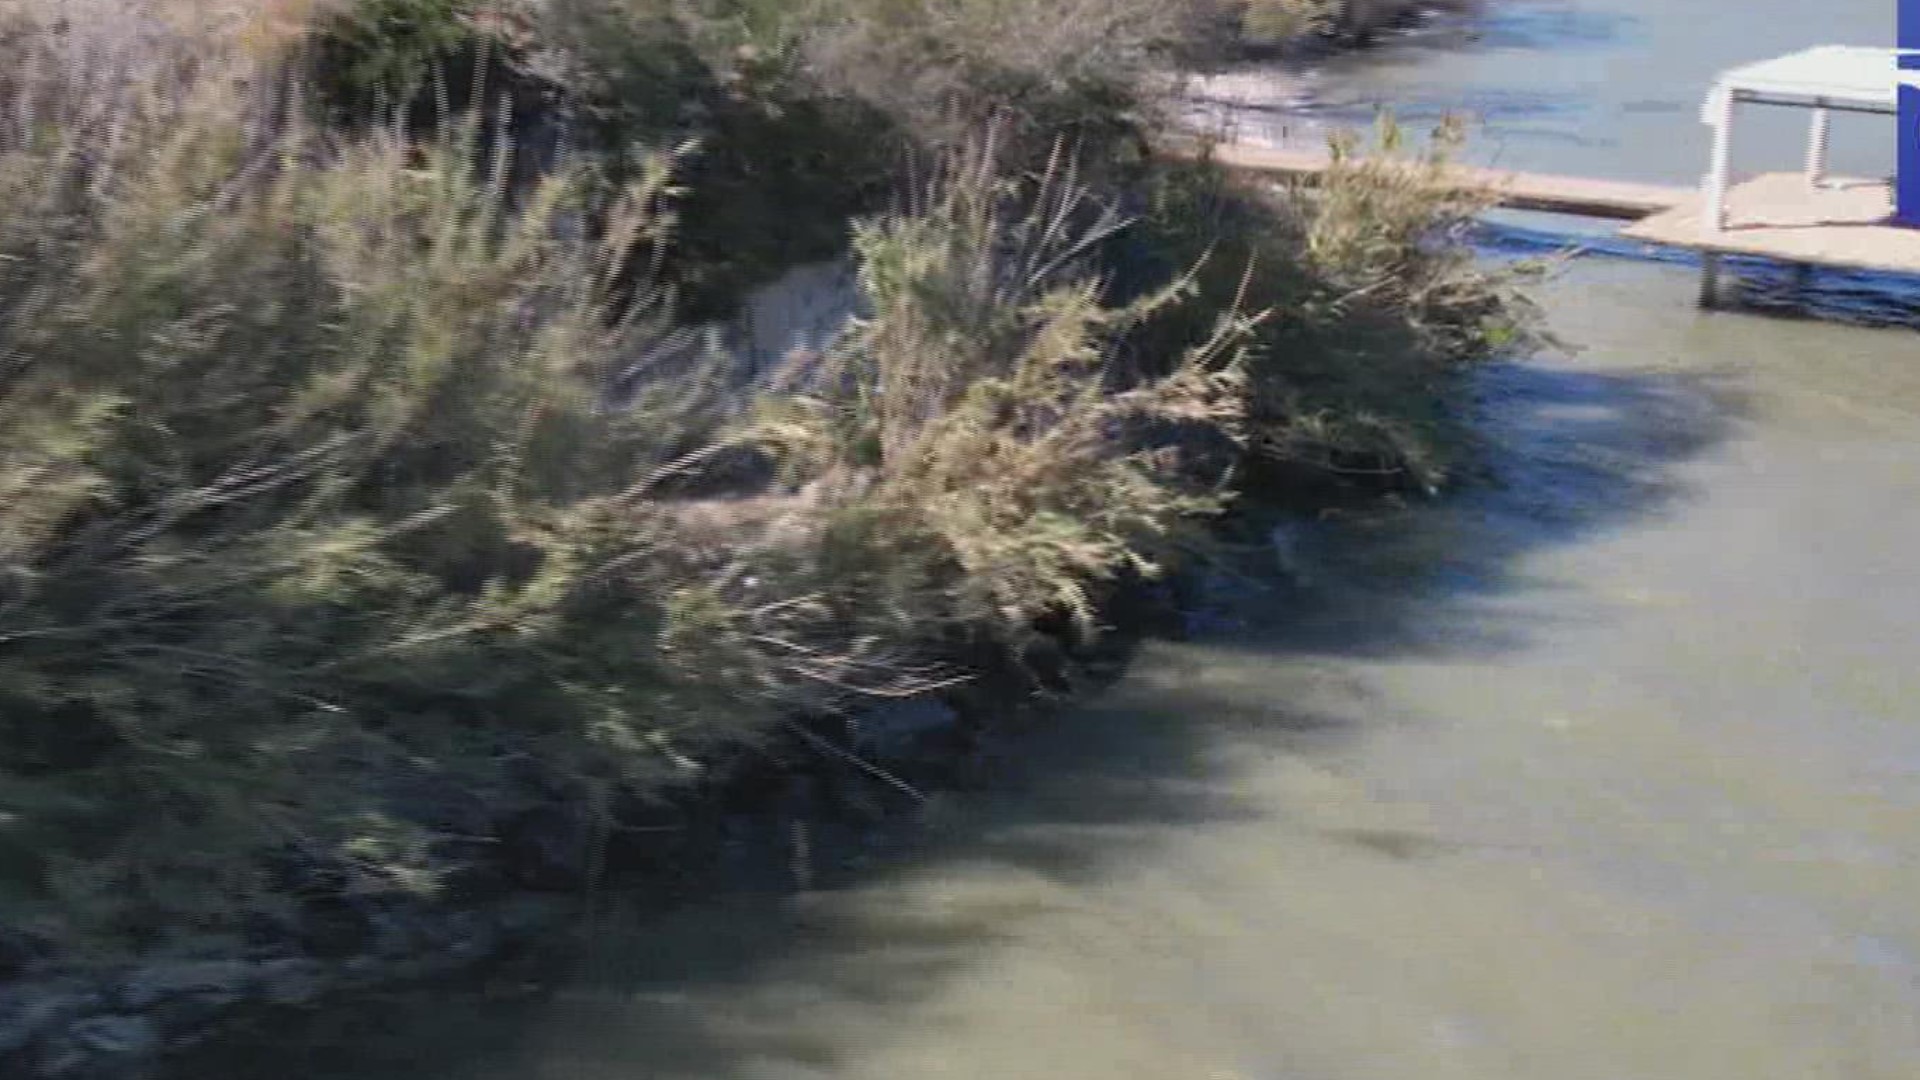 Invasive and harmful weeds around Lake Corpus Christi may soon be addressed by the city's water department.